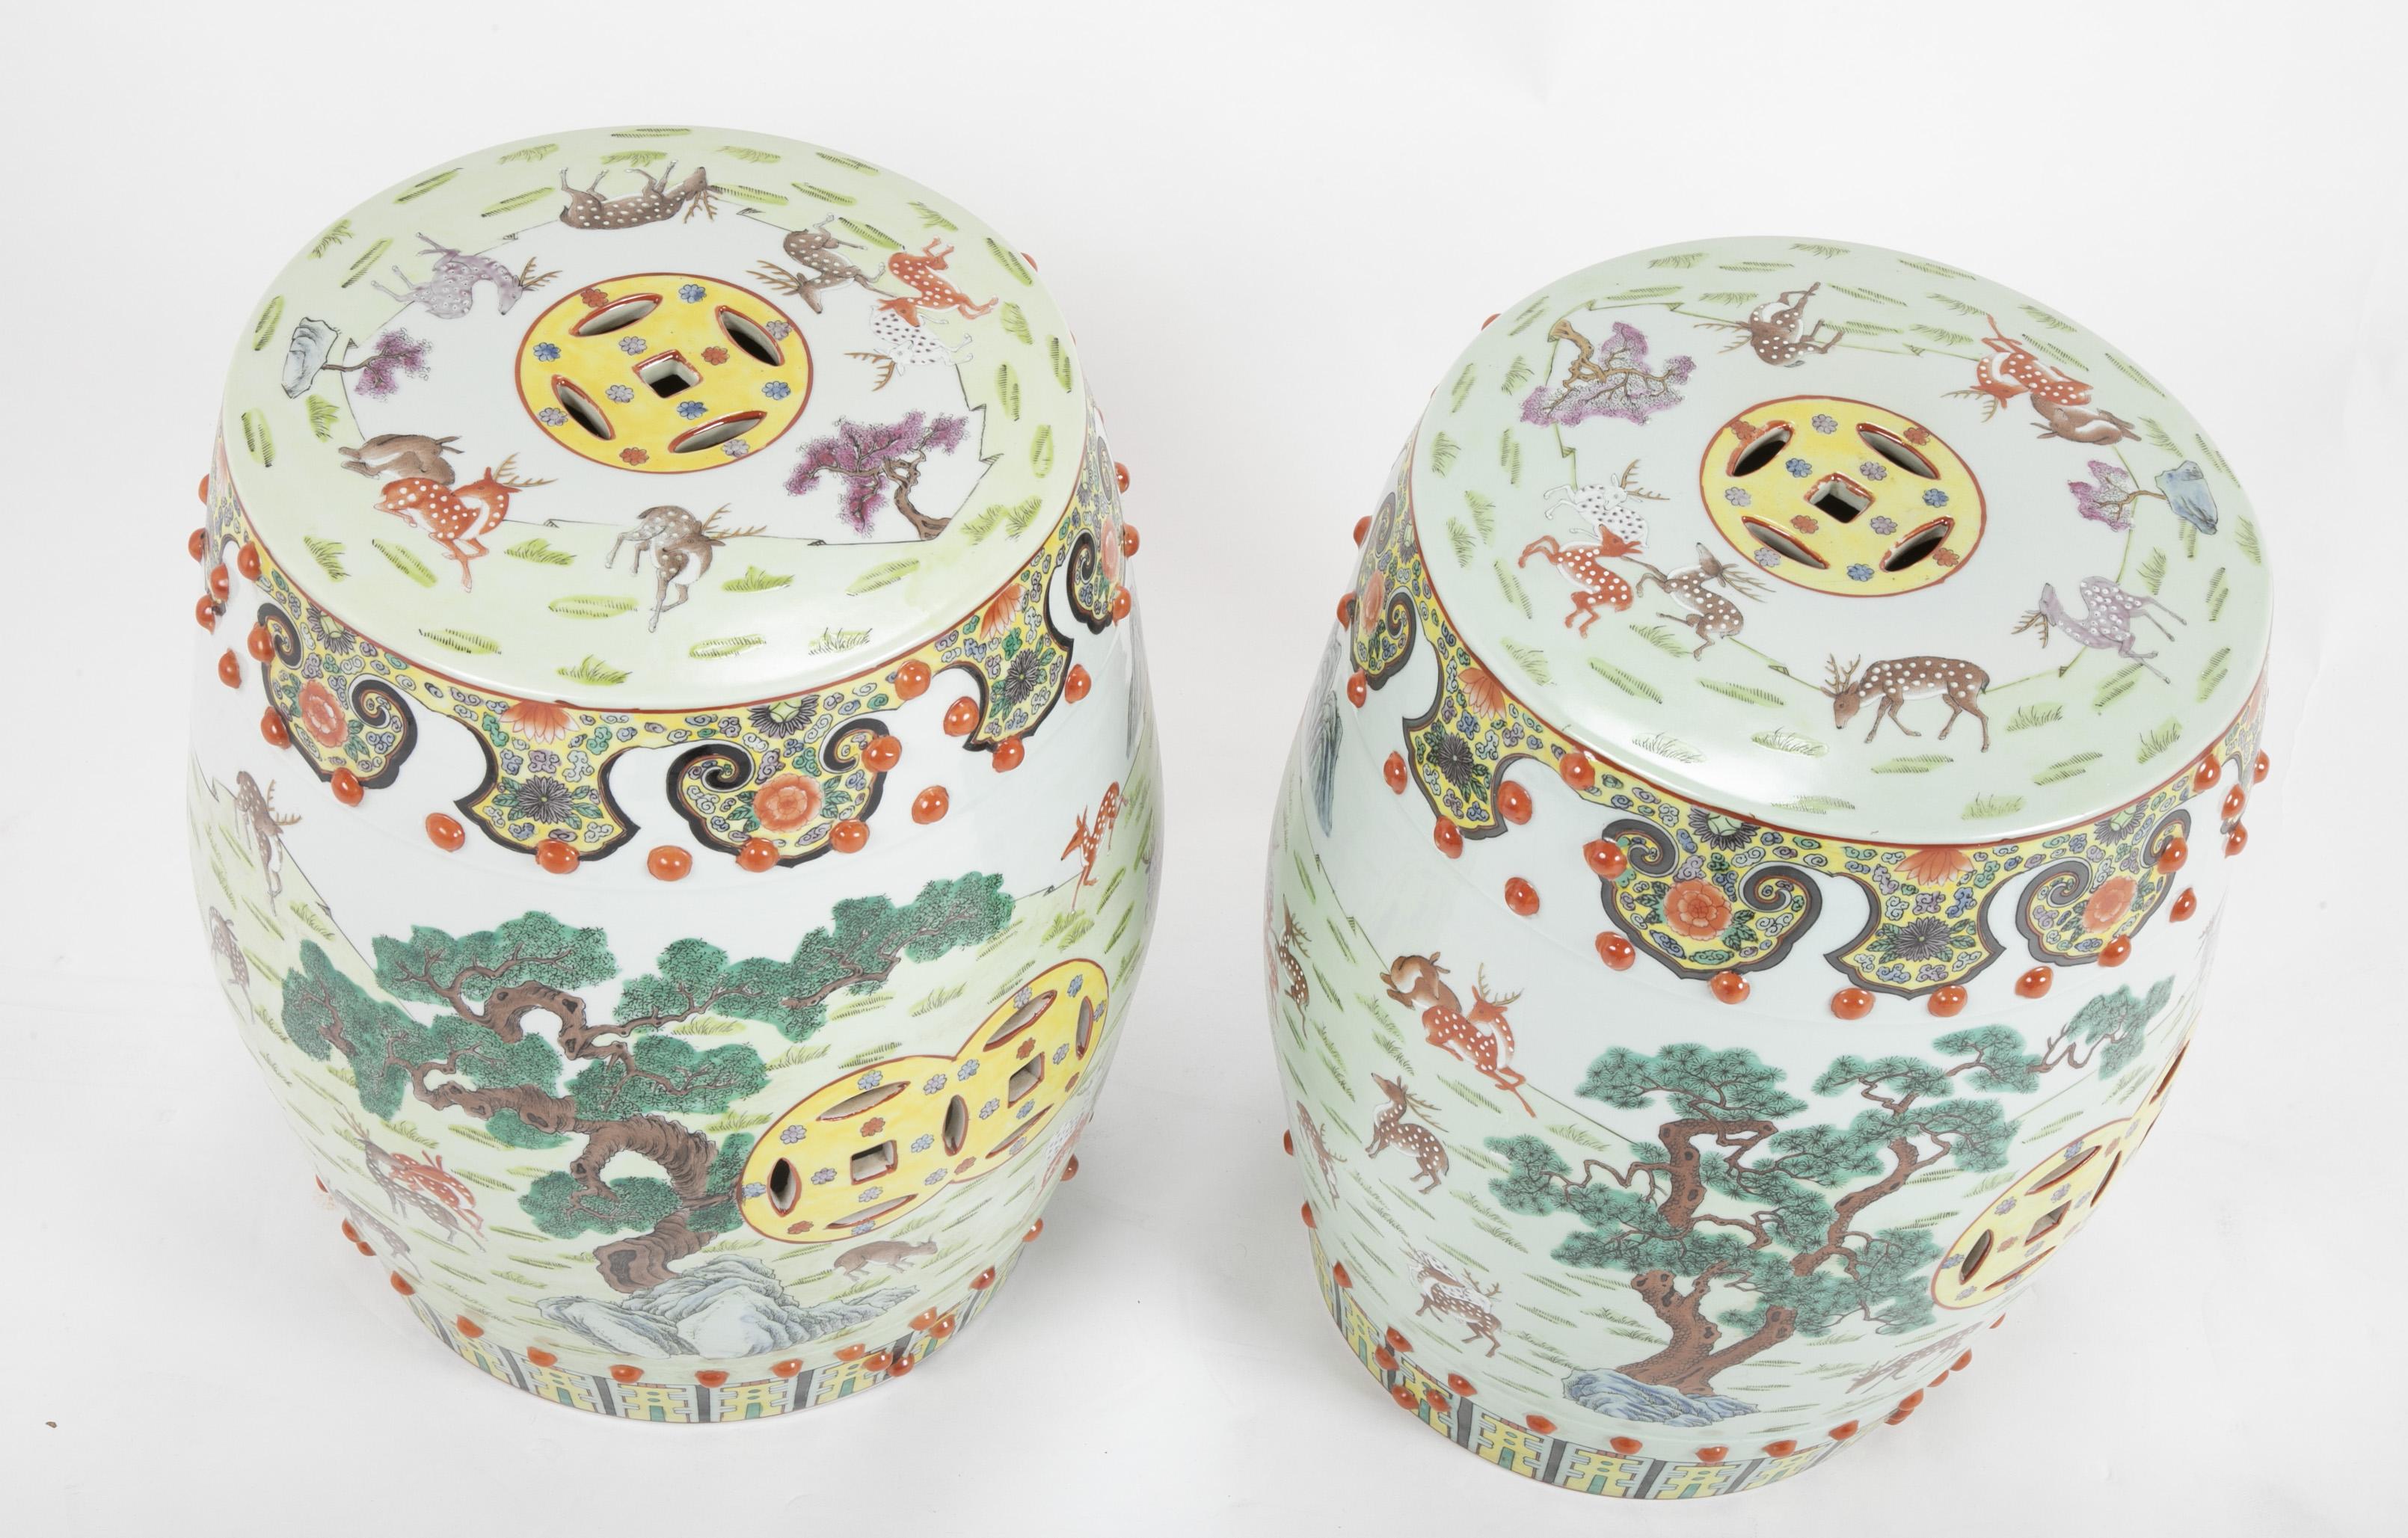 A pair of Chinese Famille rose porcelain garden seat. Depicting 